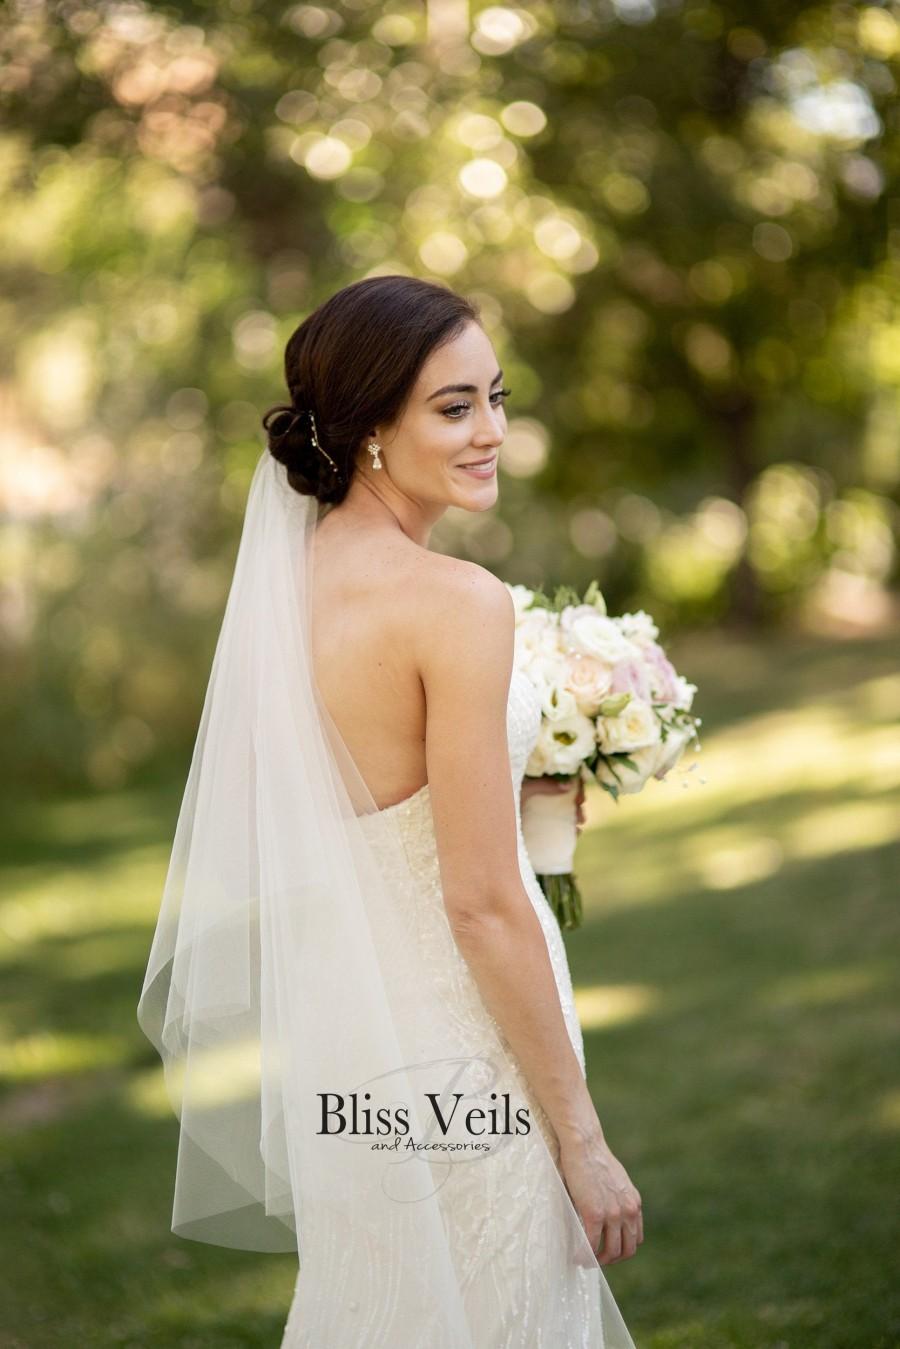 Mariage - Gorgeous 2 Tier Plain Edge Drop Veil - Veil with Blusher - Available in 9 Lengths & 10 Colors, Fast Shipping!